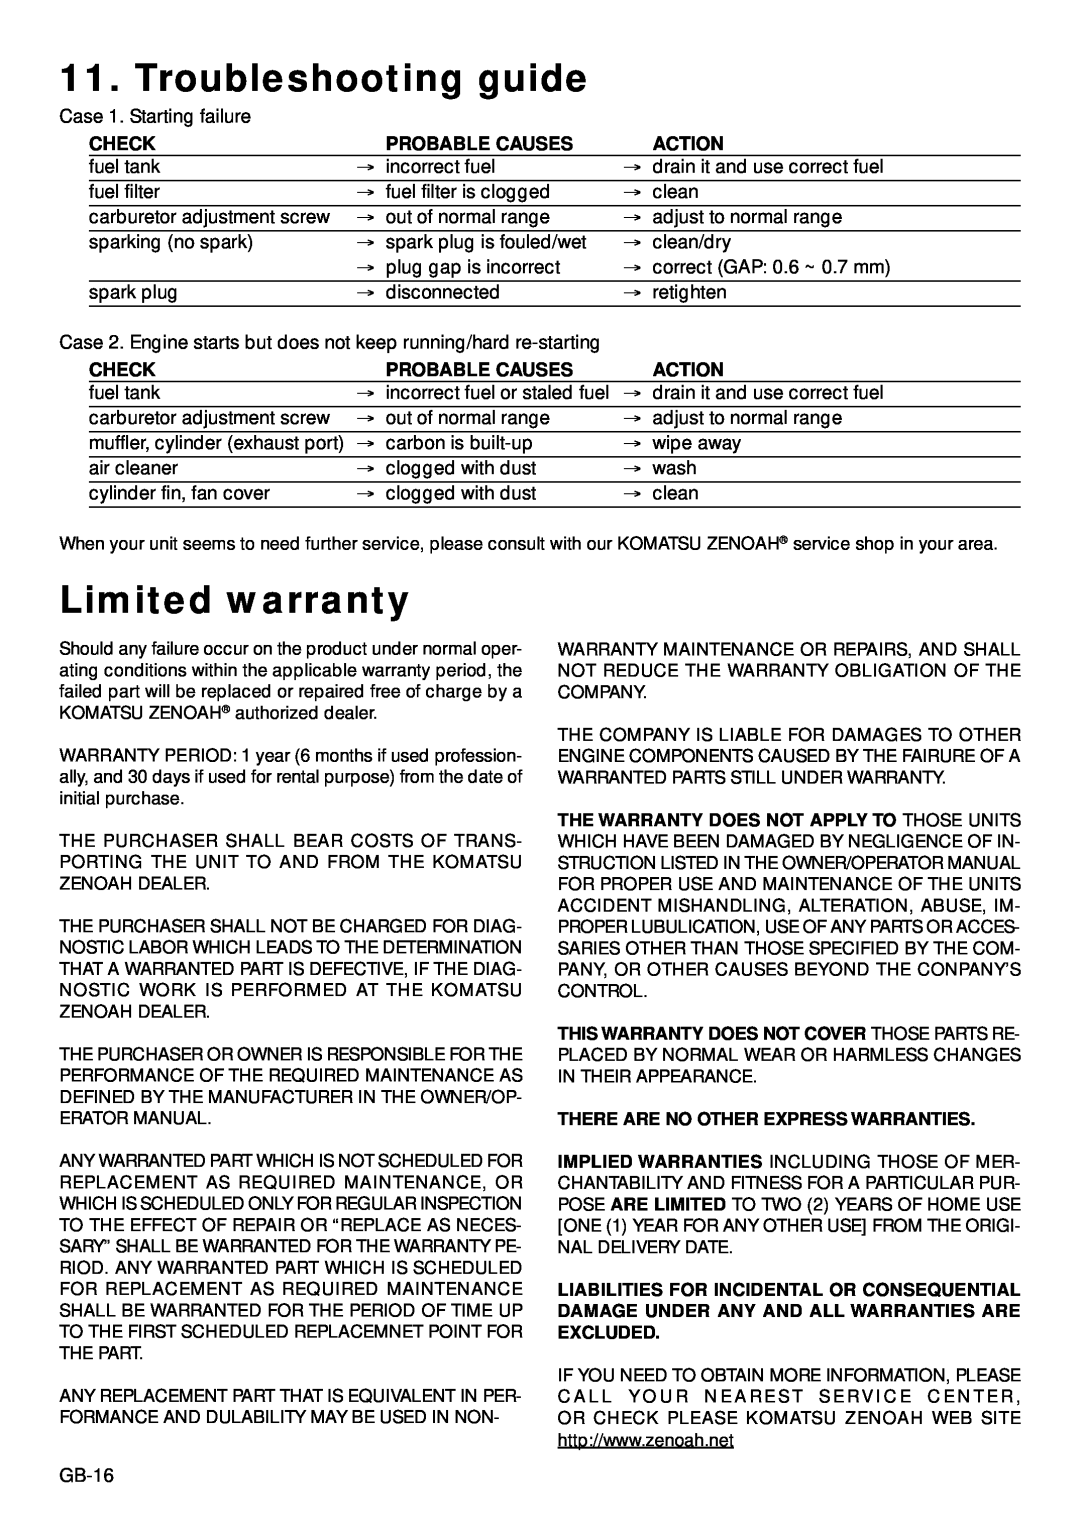 Zenoah BC2603DW, BC2603DL owner manual Troubleshooting guide, Limited warranty, Check, Probable Causes, Action 